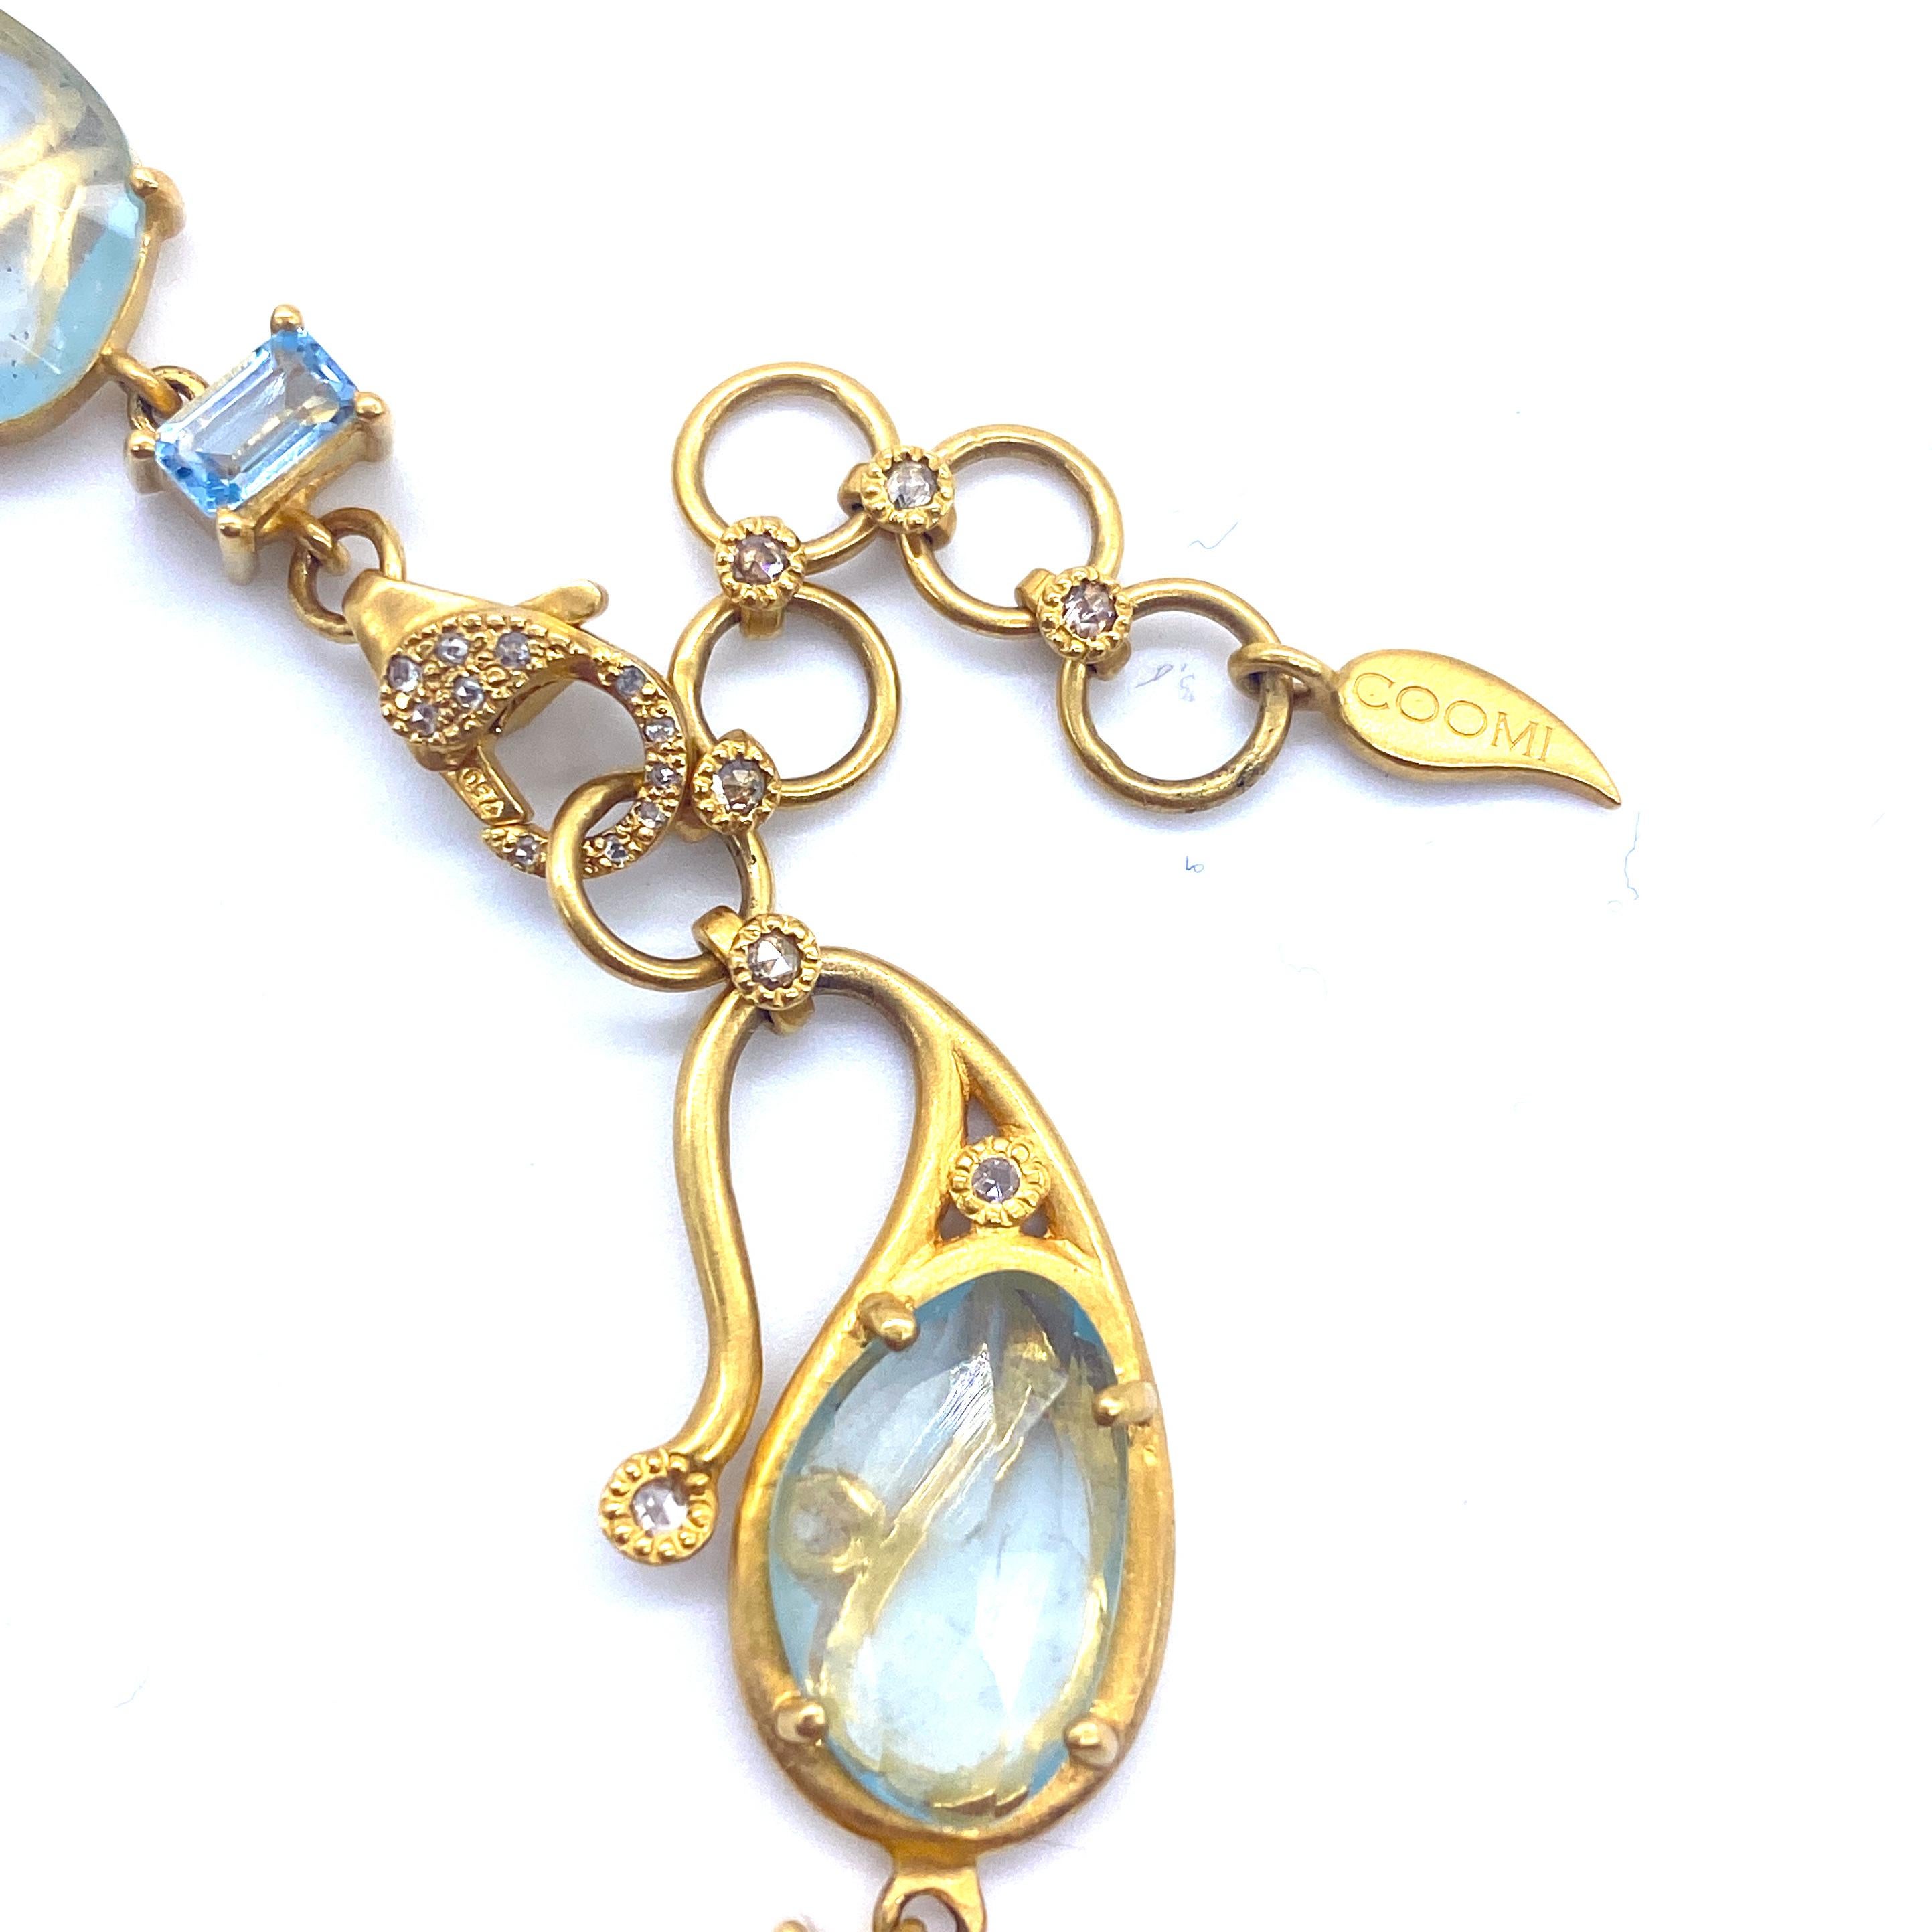 Artist COOMI Carved Morganite, Aquamarine and Diamond Necklace in 20 Karat Yellow Gold